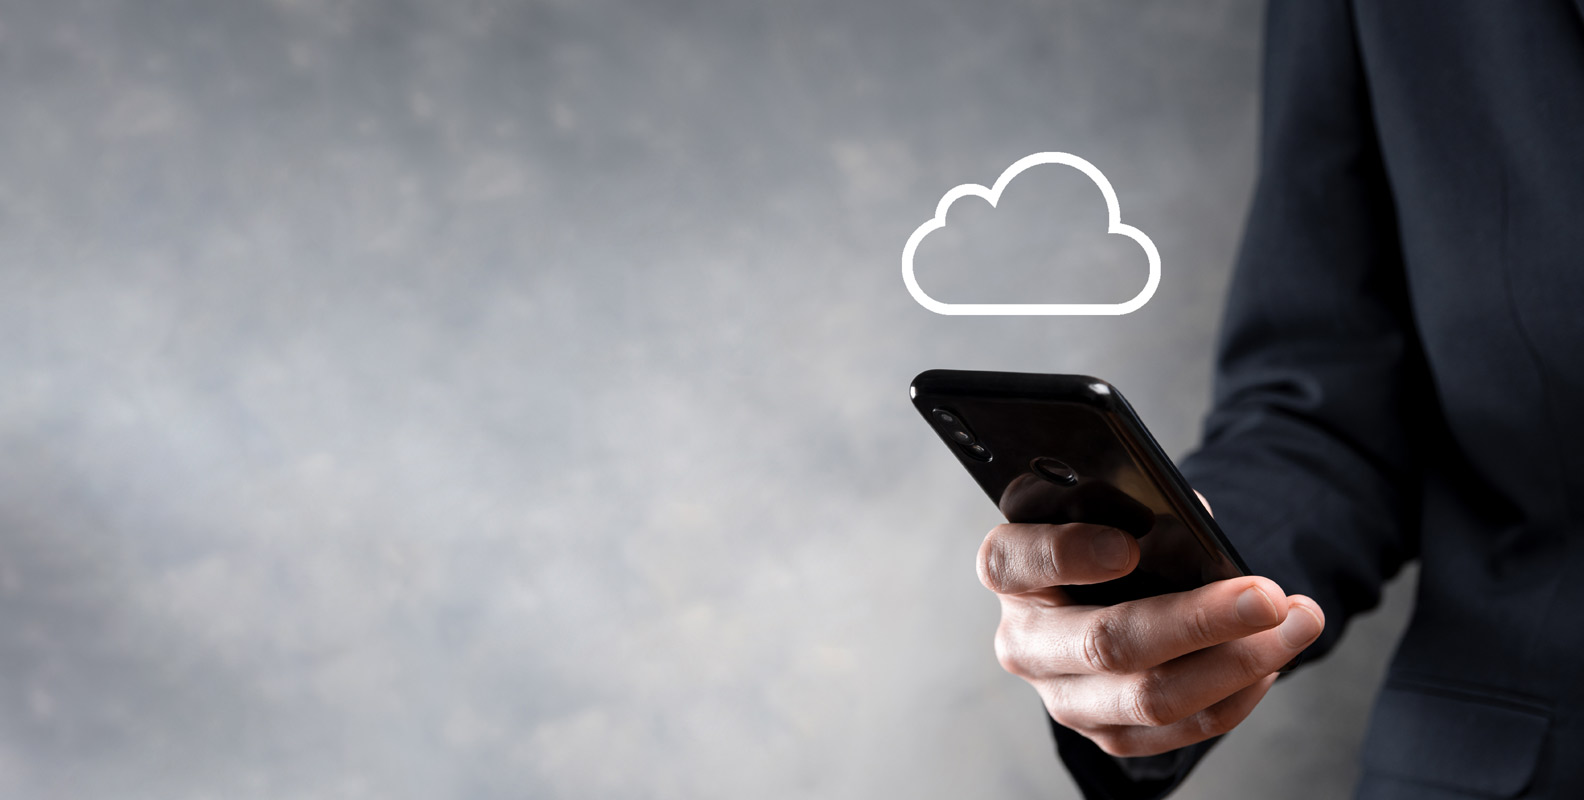 Using private cloud storage on cell phone